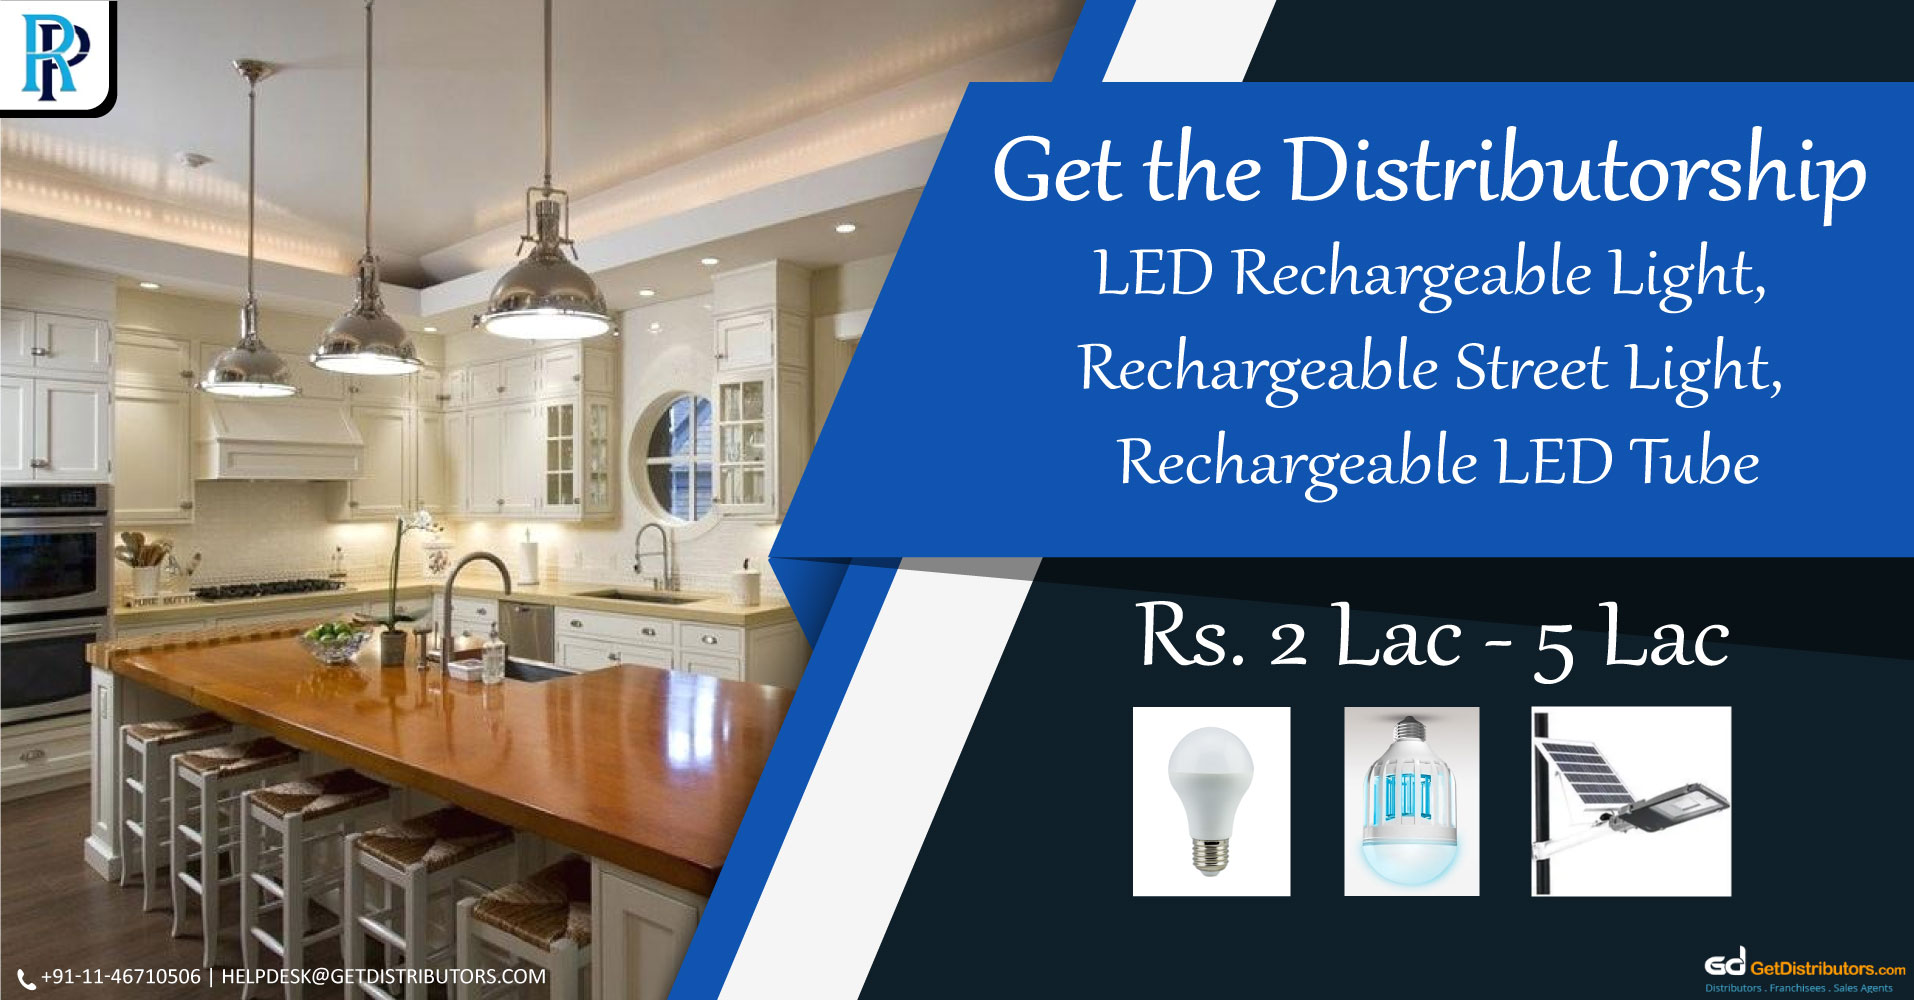 How To Take The Distributorship Of Optimum Quality Rechargeable LED Lights